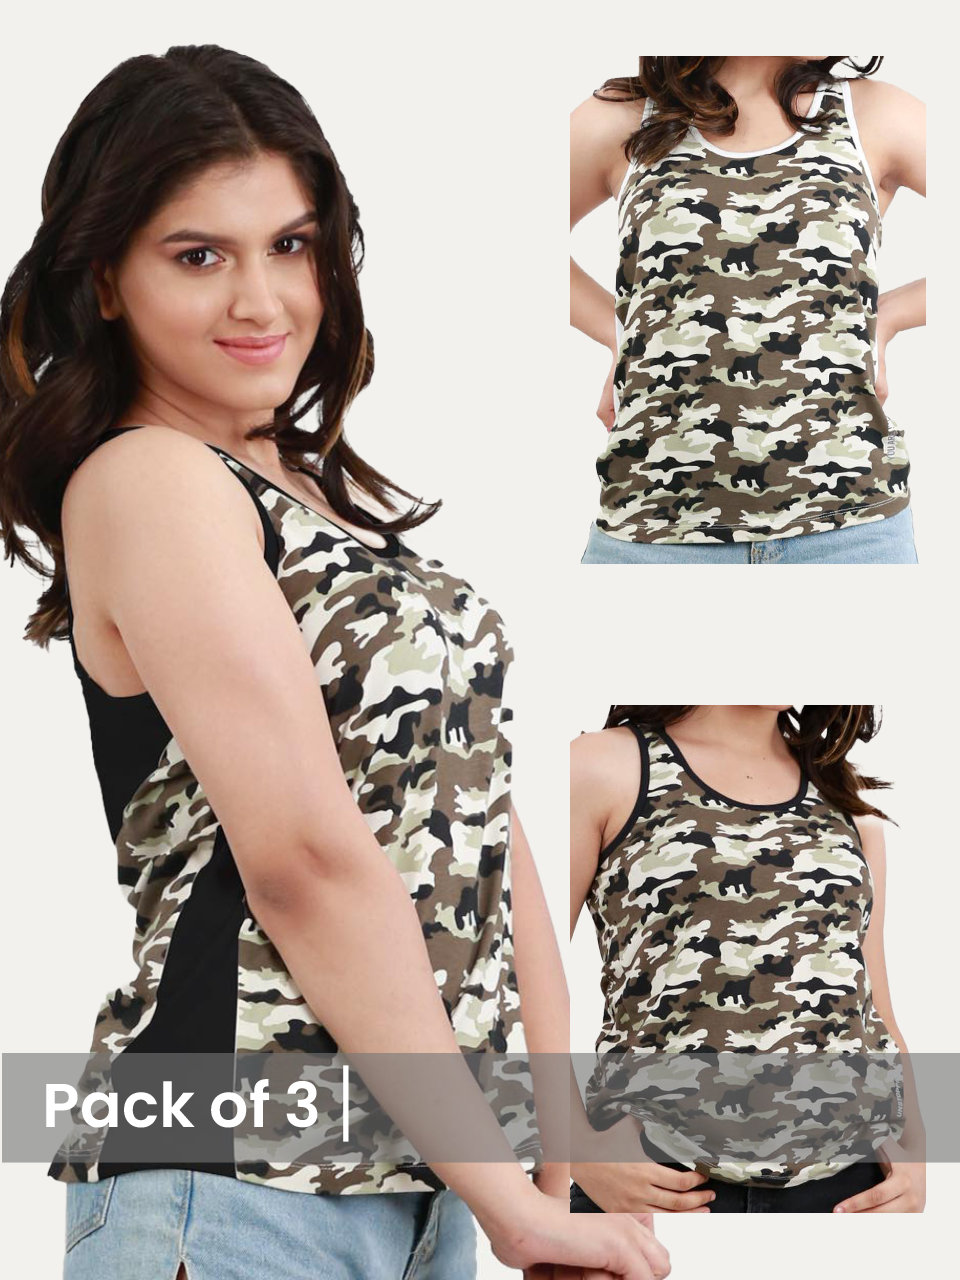 Camouflage Printed Women's Tanks (Pack of 3)